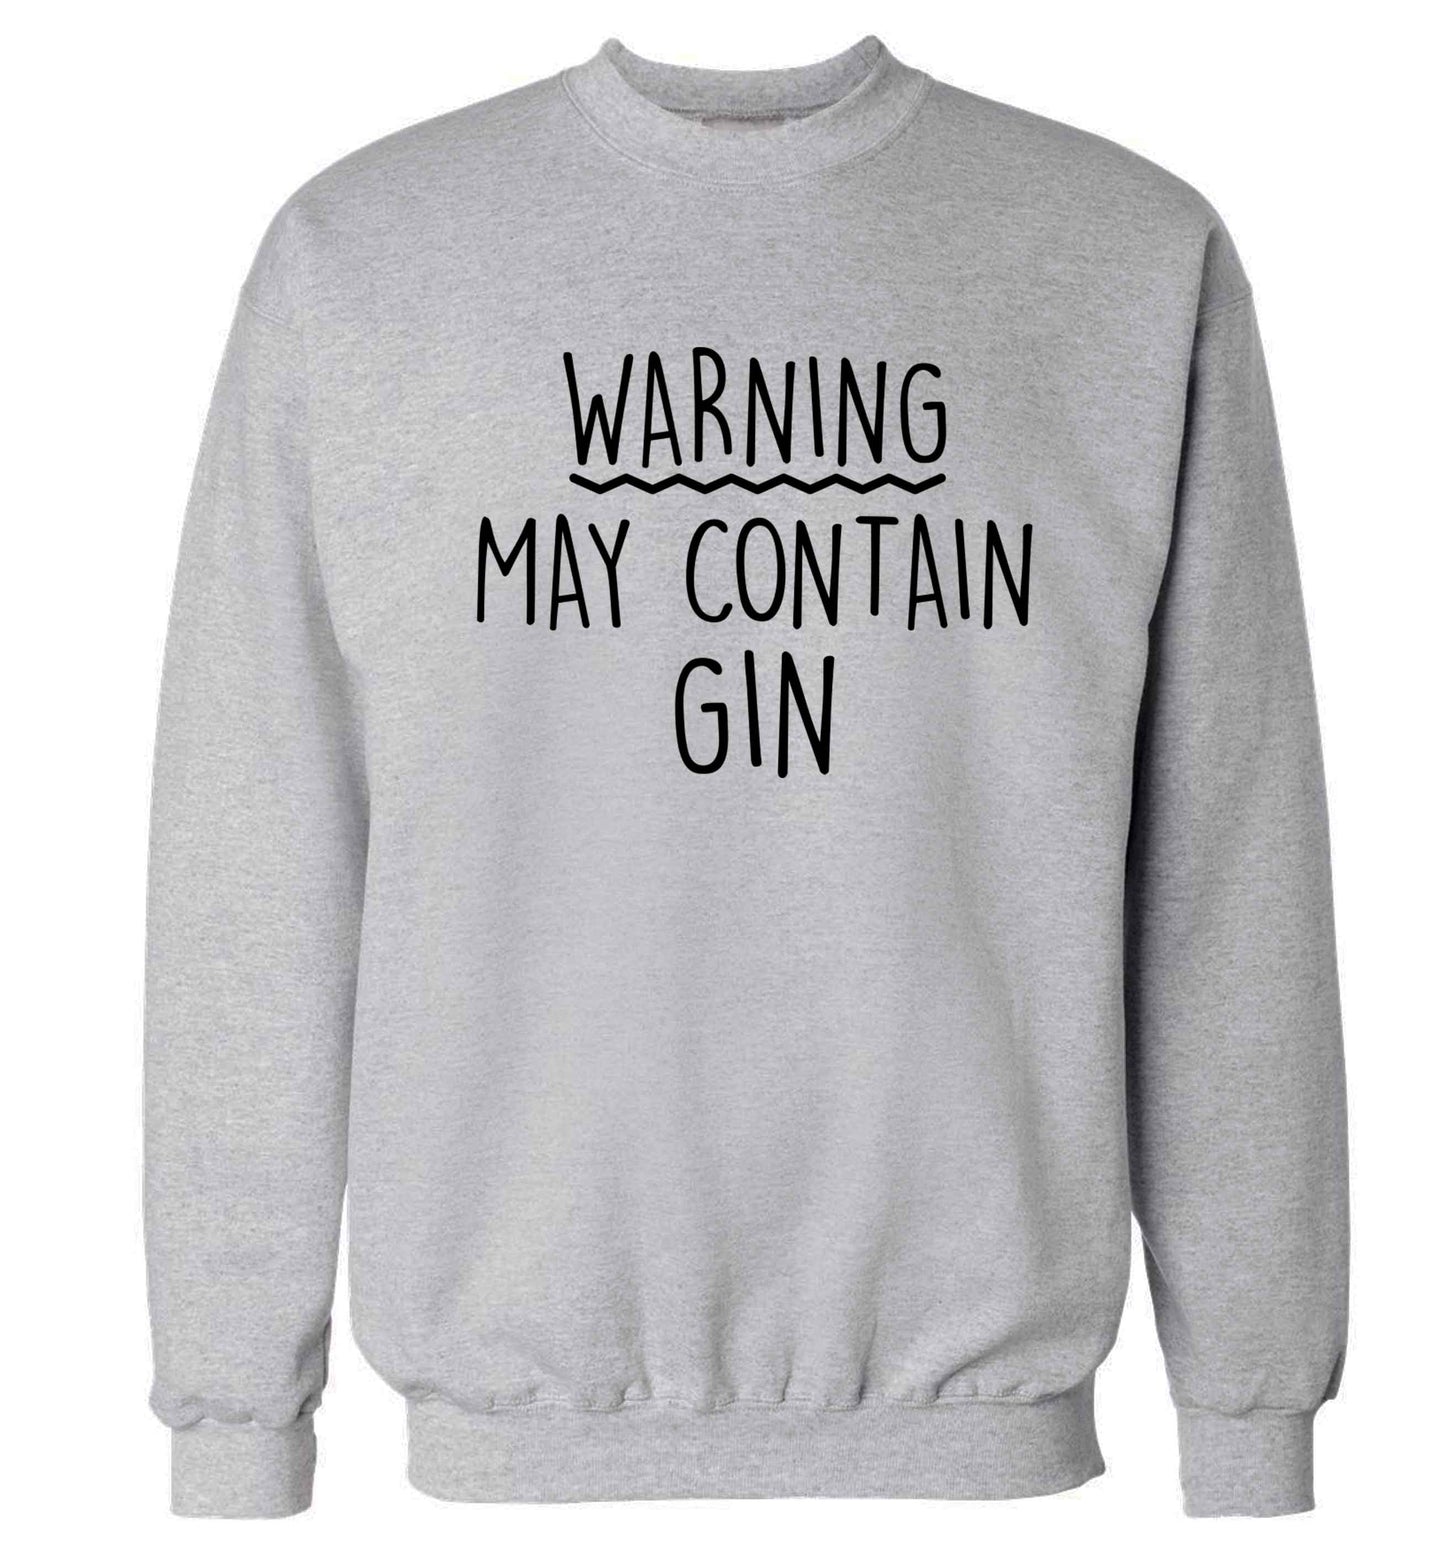 Warning may contain gin Adult's unisex grey Sweater 2XL